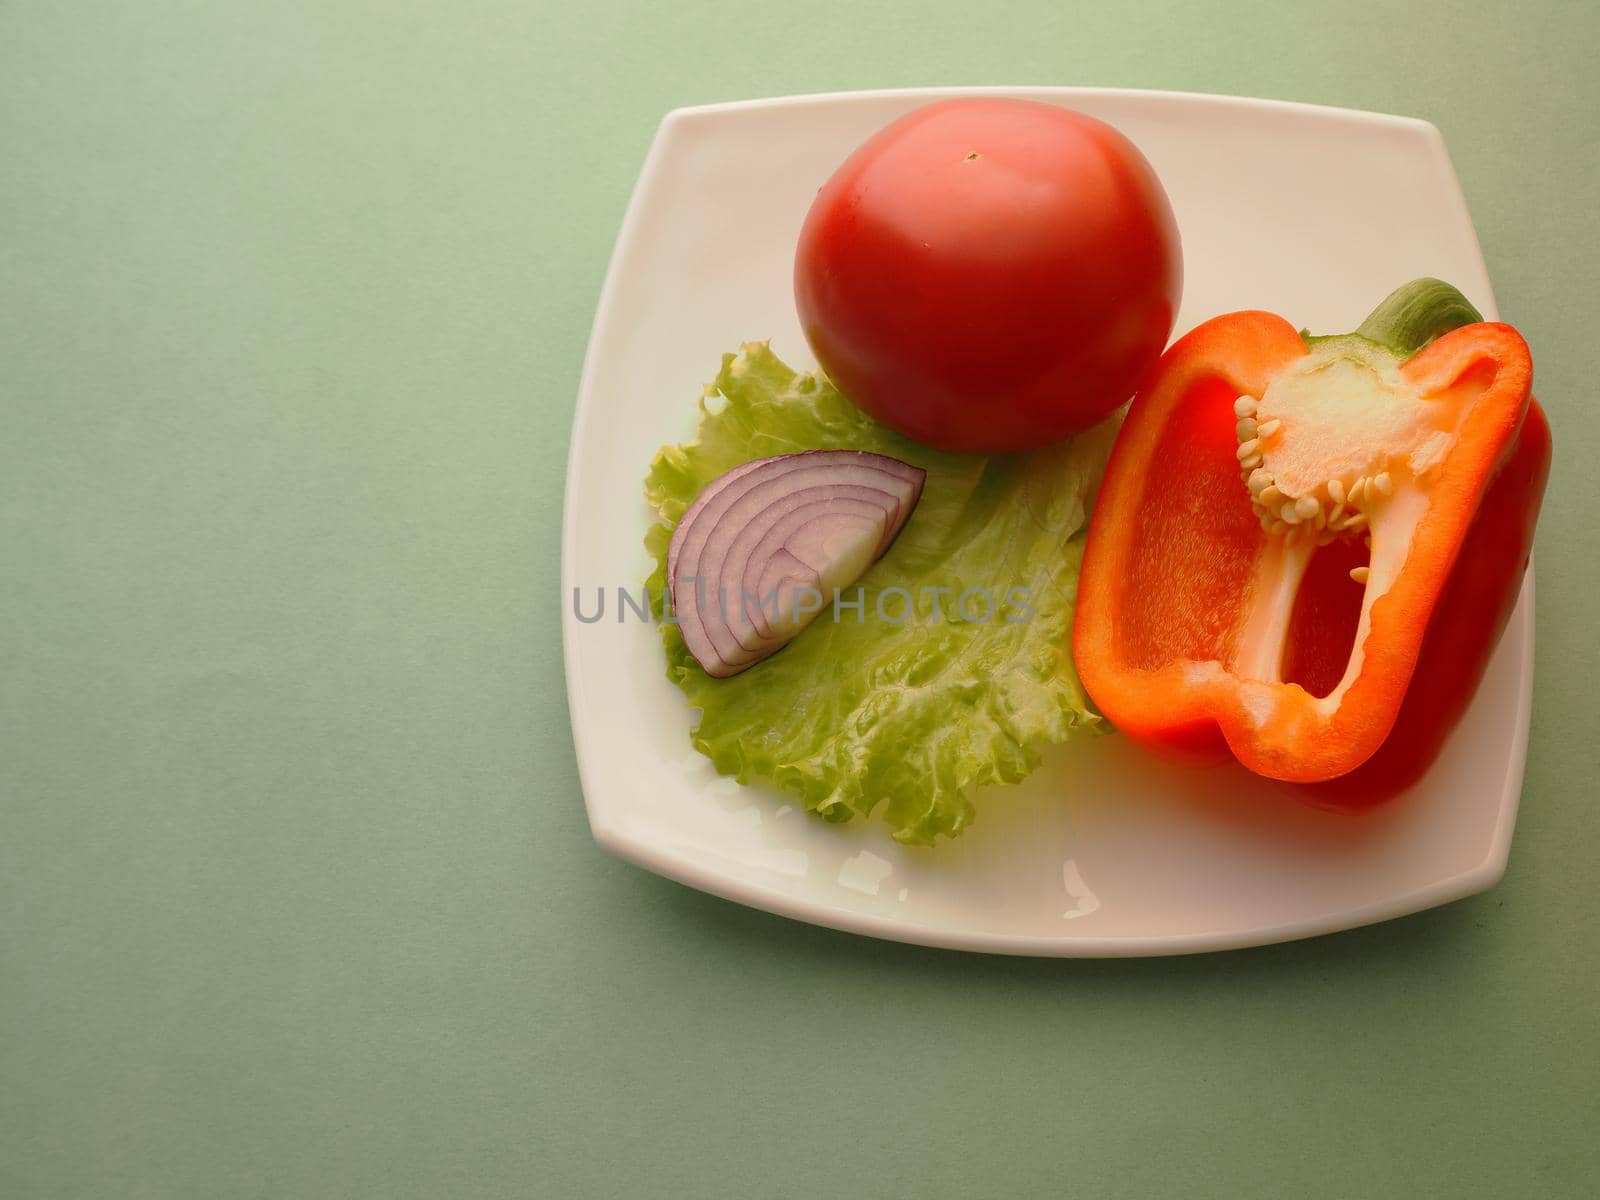 Red vegetables on a plate, close-up by Olga26